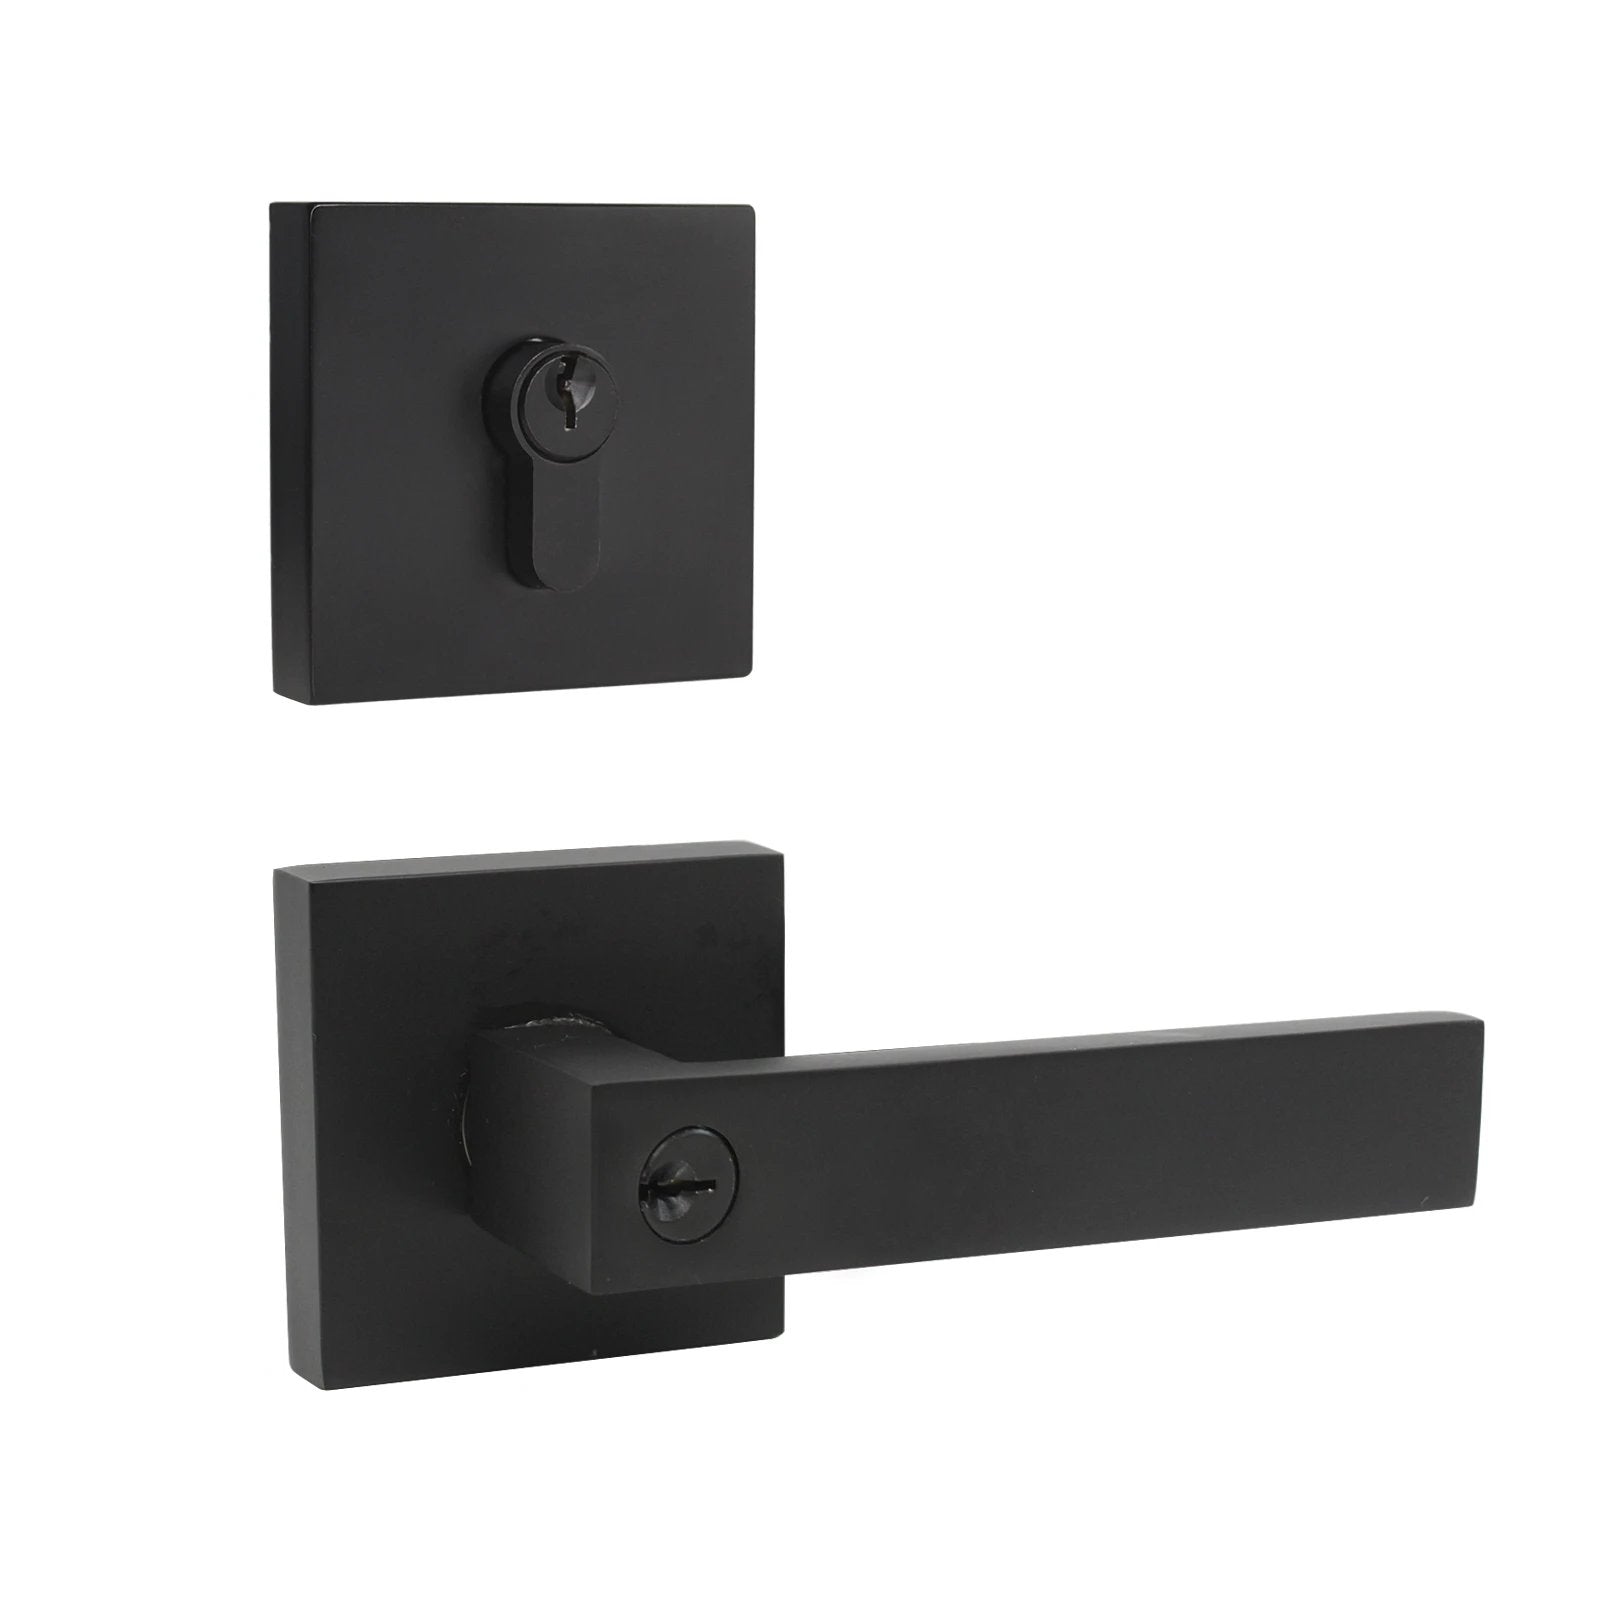 Keyed Entry Door Levers and Double Cylinder Deadbolts Locks Combo